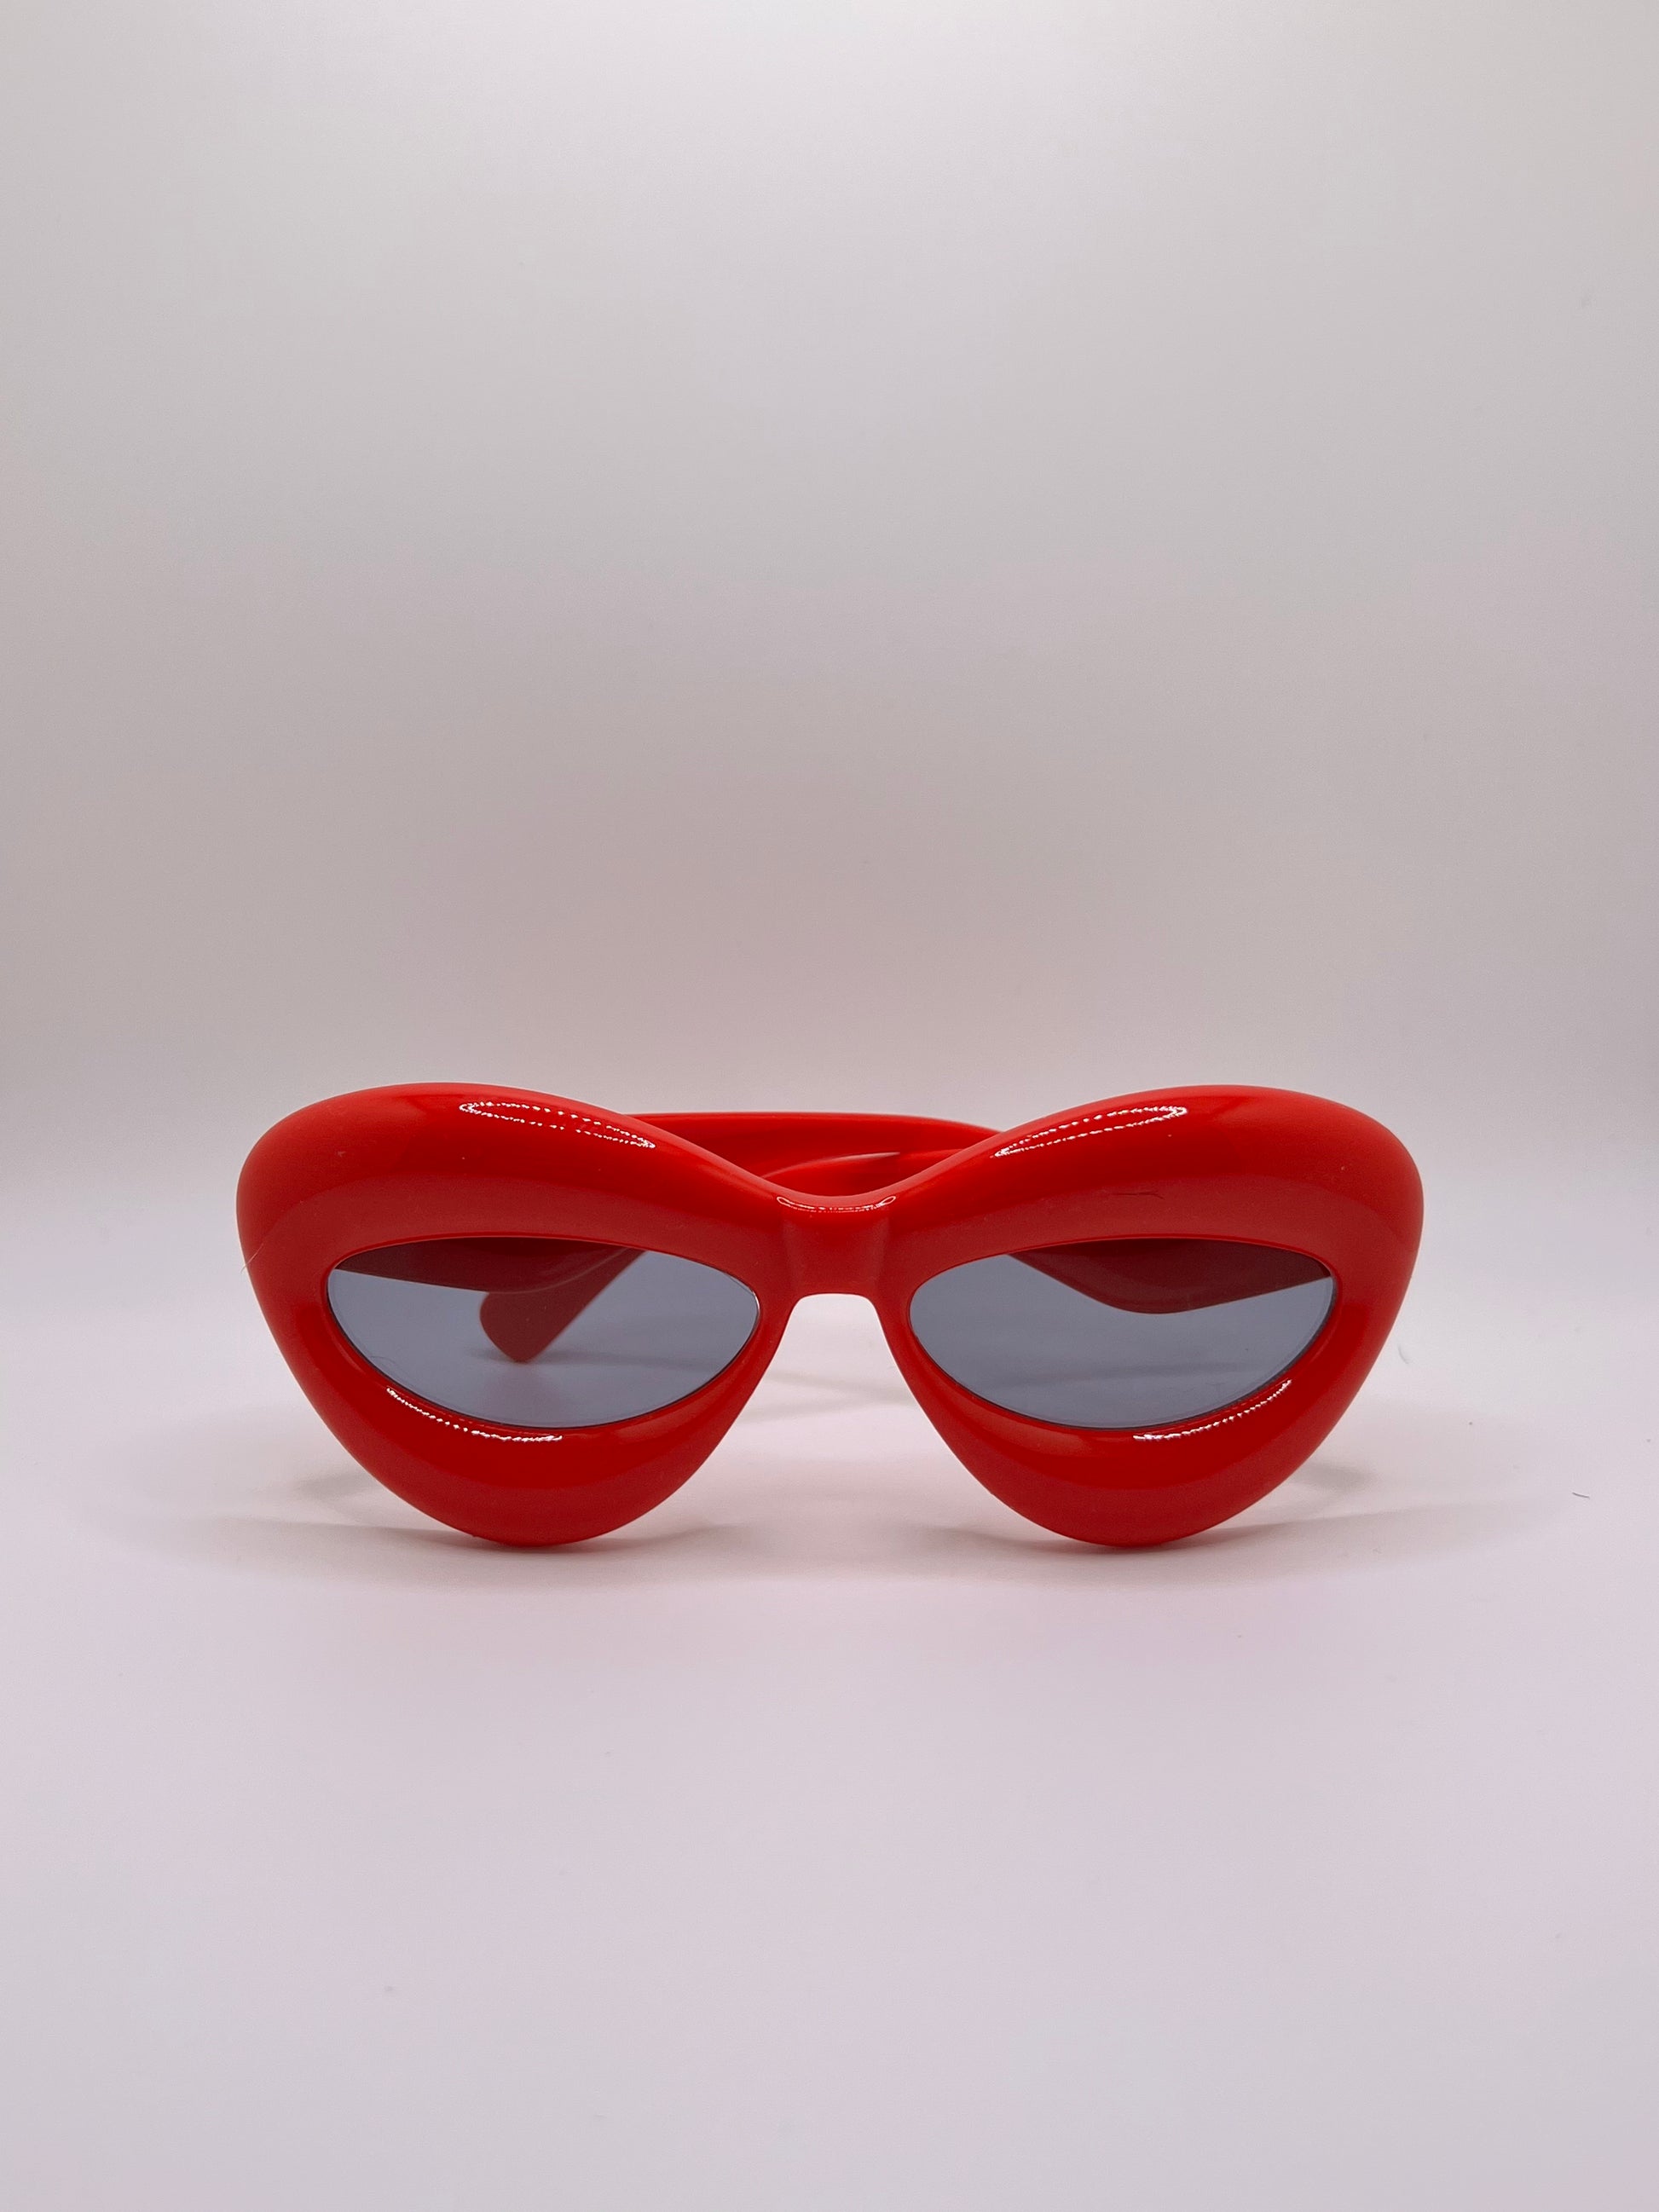 These inflated sunglasses in red are giving effortless icon. Try them in every color and add a splash of extra to any outfit. These work for formal events or a day of errands and will make you feel glam every step of the way.